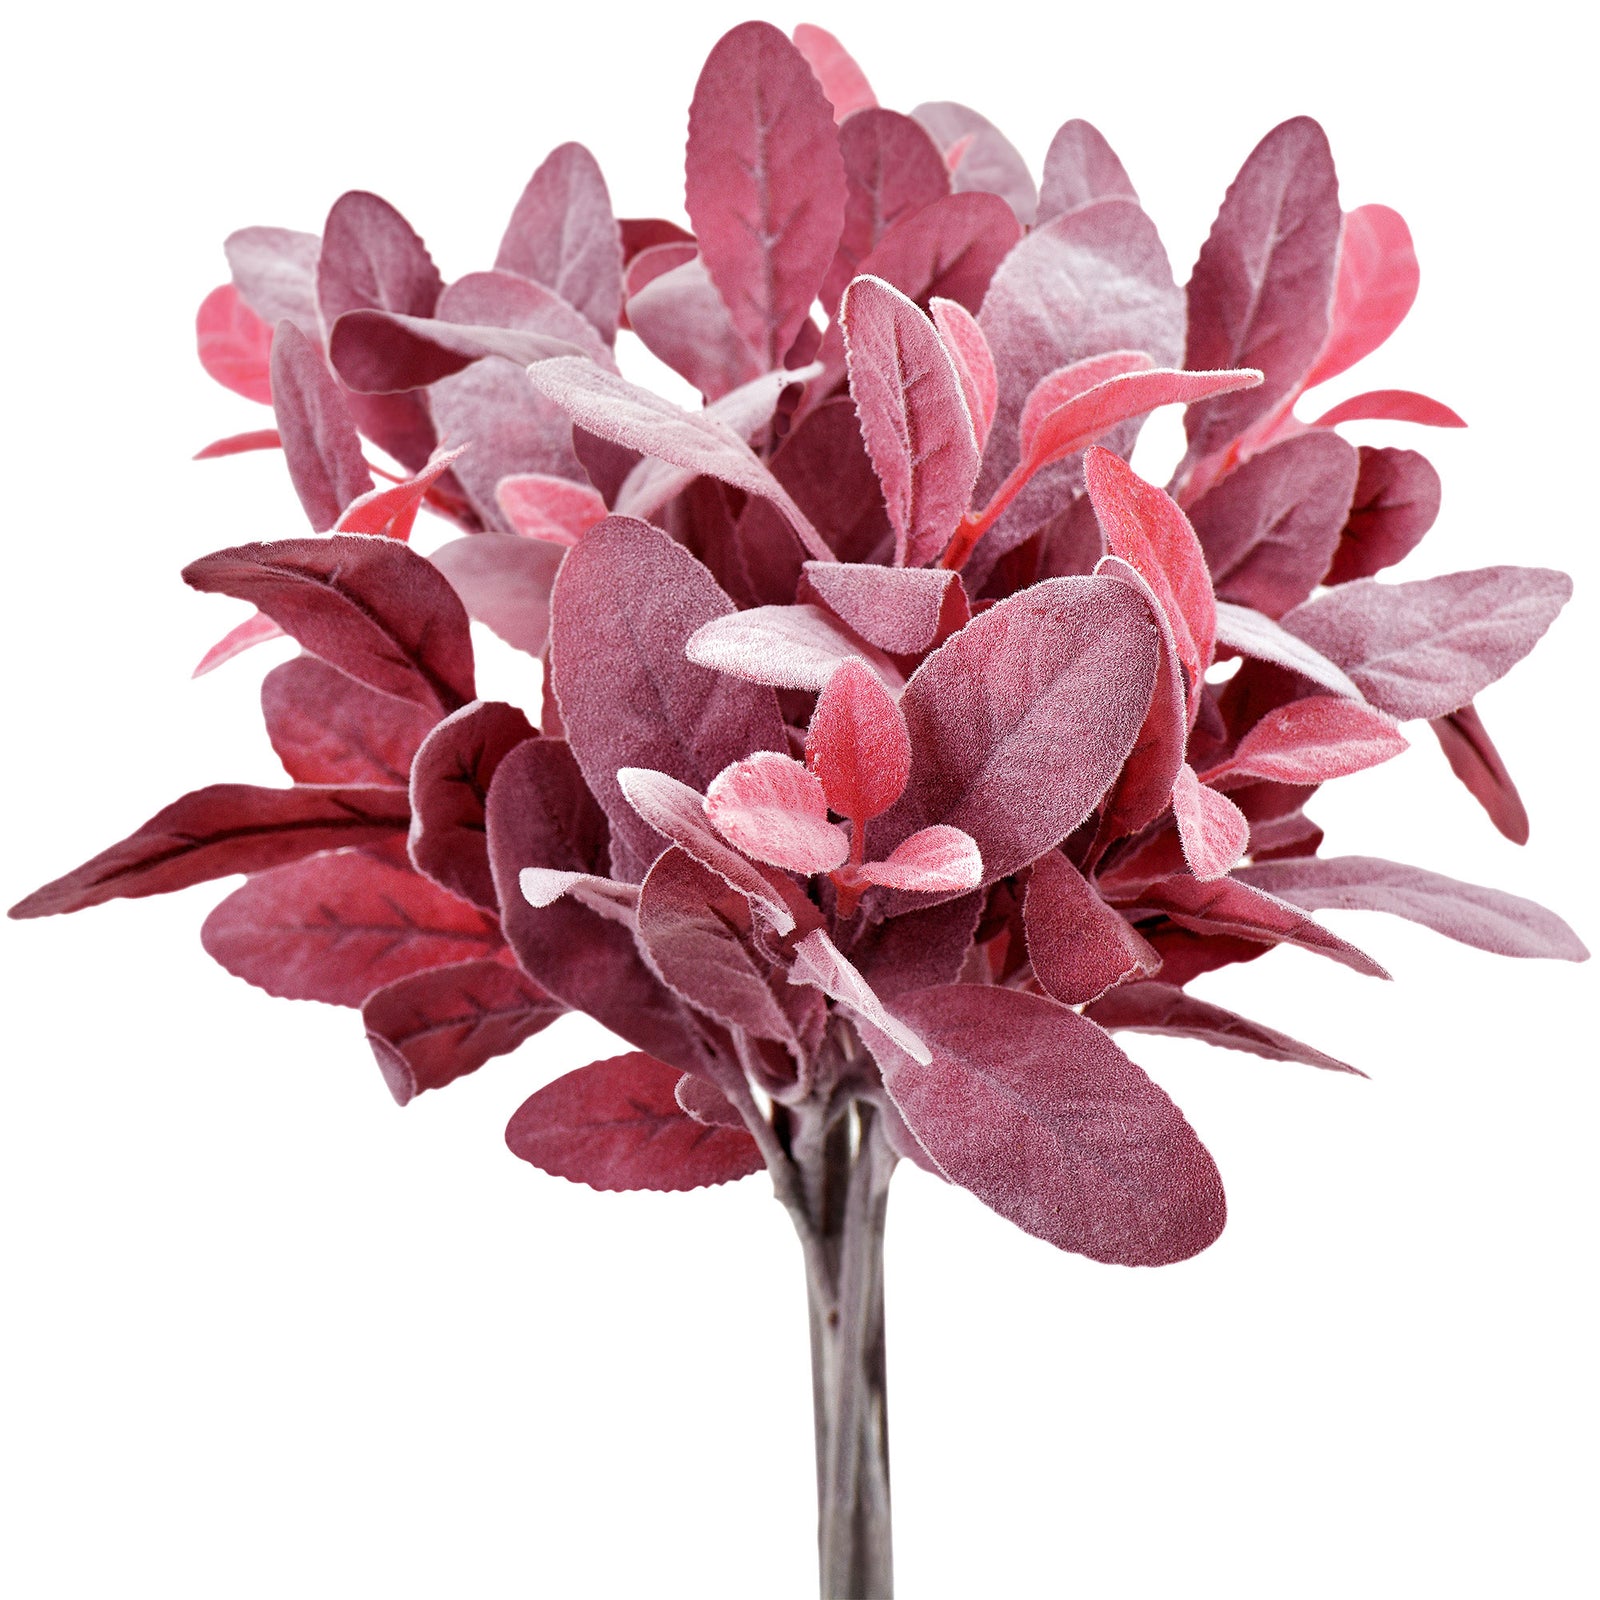 FiveSeasonStuff Lusty Lavender Pink Lamb's Ear Artificial Greenery Bush Plants for Wedding Flower Fillers DIY Bouquets and Floral Arrangements (6 Stems 14 inches Tall)